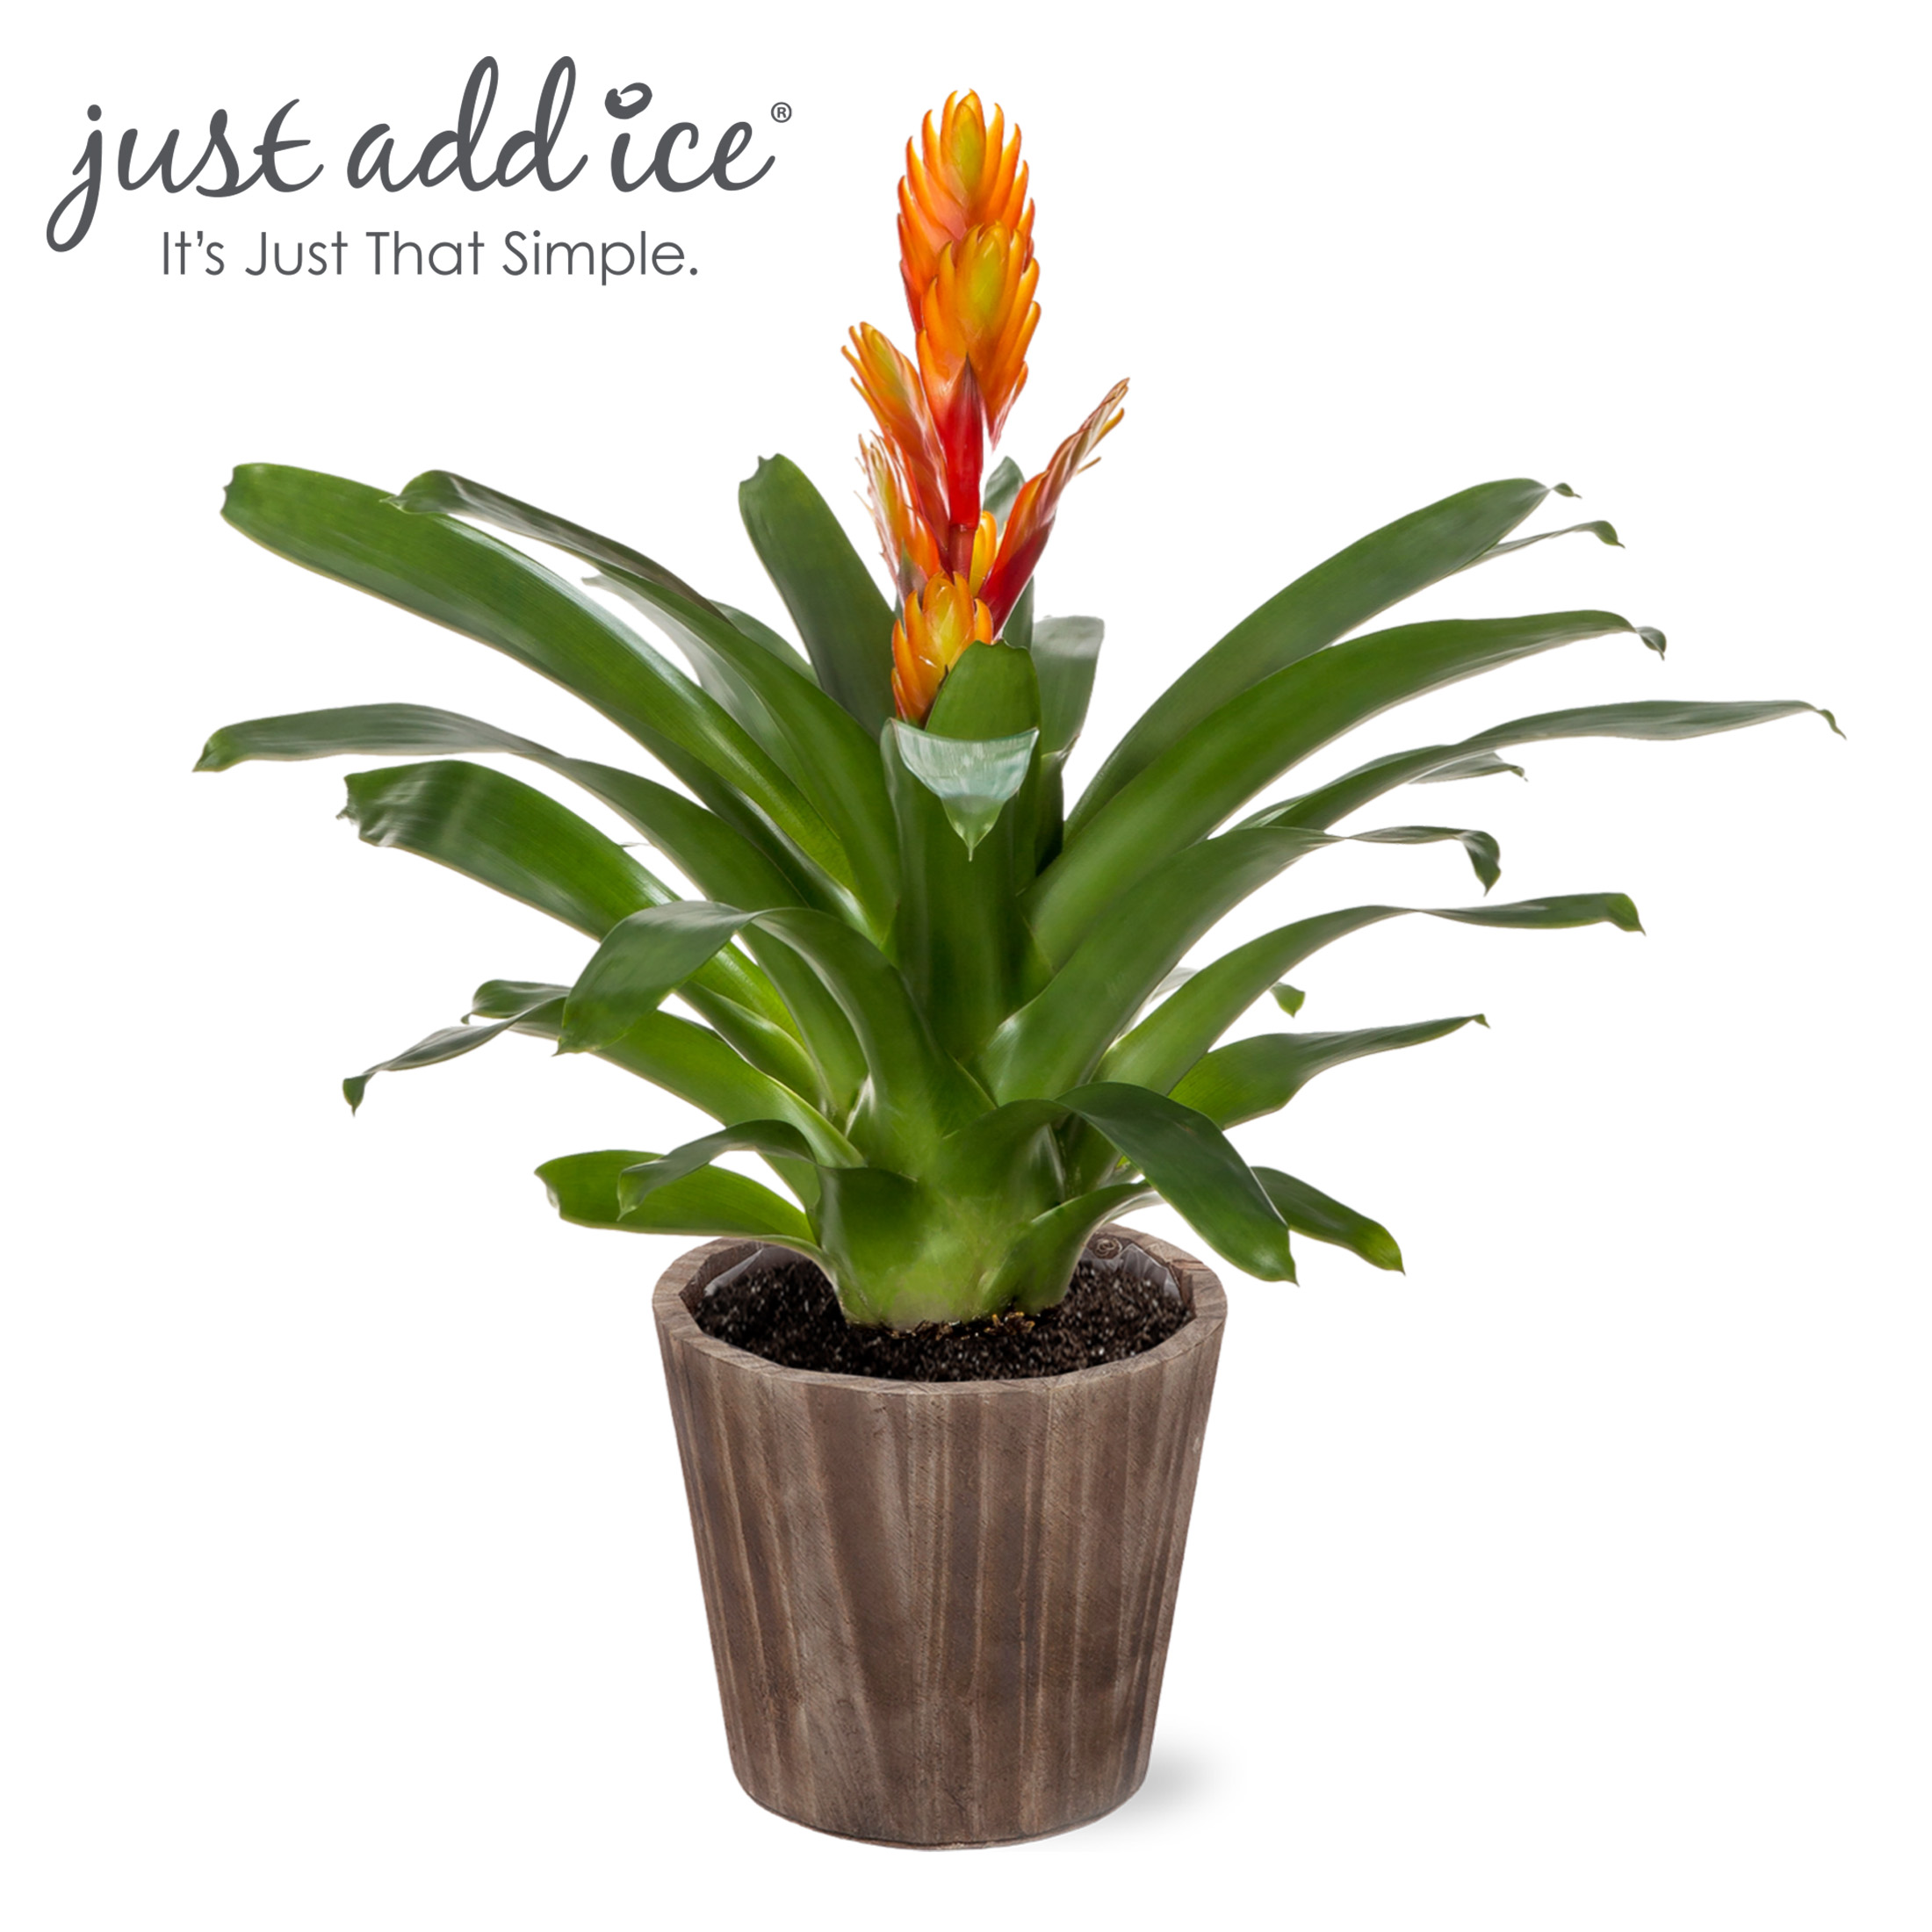 Just Add Ice 15" Tall Orange Vriesea Bromeliad Live Plant in 5" Moss Topped Brown Wood Pot, House Plant - image 1 of 6